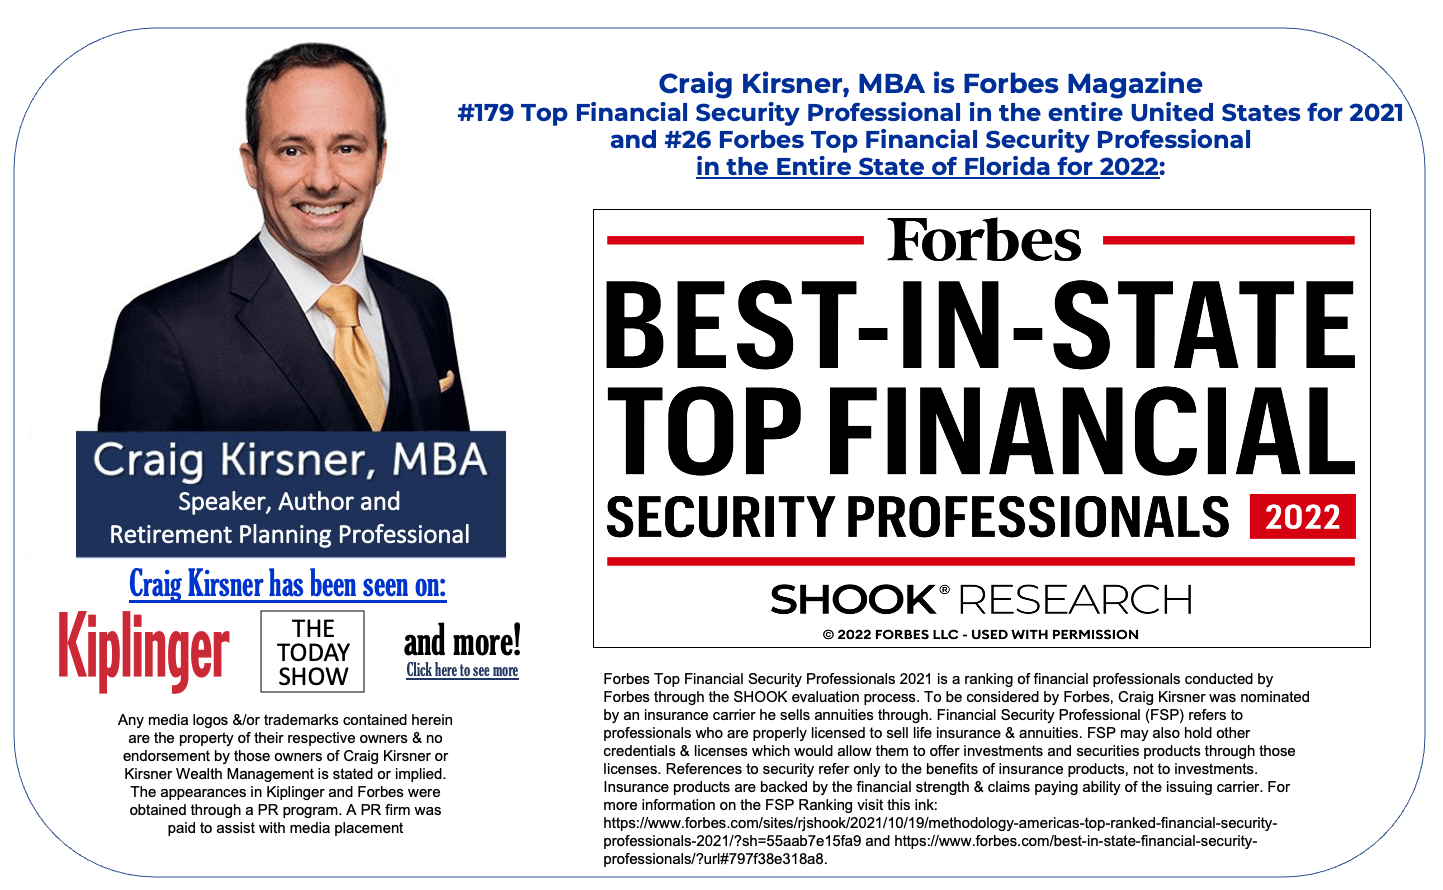 Craig Kirsner, MBA is Forbes Magazine #179 Top Financial Security Professional in the entire United States for 2021 and #26 Forbes Top Financial Security Professional in the Entire State of Florida for 2022: Craig Kirsner, MBA: Speaker, Author, and Retirement Planning Professional. Craig Kirsner has been seen on: Kiplinger, The Today Show, and more! Any media logos &/or trademarks contained herein are the property of their respective owners & no endorsement by those owners of Craig Kirsner or Kirsner Wealth Management is stated or implied. The appearances in Kiplinger and Forbes were obtained through a PR program. A PR firm was paid to assist with media placement Forbes Best-In-State tope Financial Security Professionals 2022 Award Forbes Top Financial Security Professionals 2021 is a ranking of financial professionals conducted by Forbes through the SHOOK evaluation process. To be considered by Forbes, Craig Kirsner was nominated by an insurance carrier he sells annuities through. Financial Security Professional (FSP) refers to professionals who are properly licensed to sell life insurance & annuities. FSP may also hold other credentials & licenses which would allow them to offer investments and securities products through those licenses. References to security refer only to the benefits of insurance products, not to investments. Insurance products are backed by the financial strength & claims paying ability of the issuing carrier. For more information on the FSP Ranking visit this ink: https://www.forbes.com/sites/rjshook/2021/10/19/methodology-americas-top-ranked-financial-security-professionals-2021/?sh=55aab7e15fa9 and https://www.forbes.com/best-in-state-financial-security-professionals/?url#797f38e318a8.